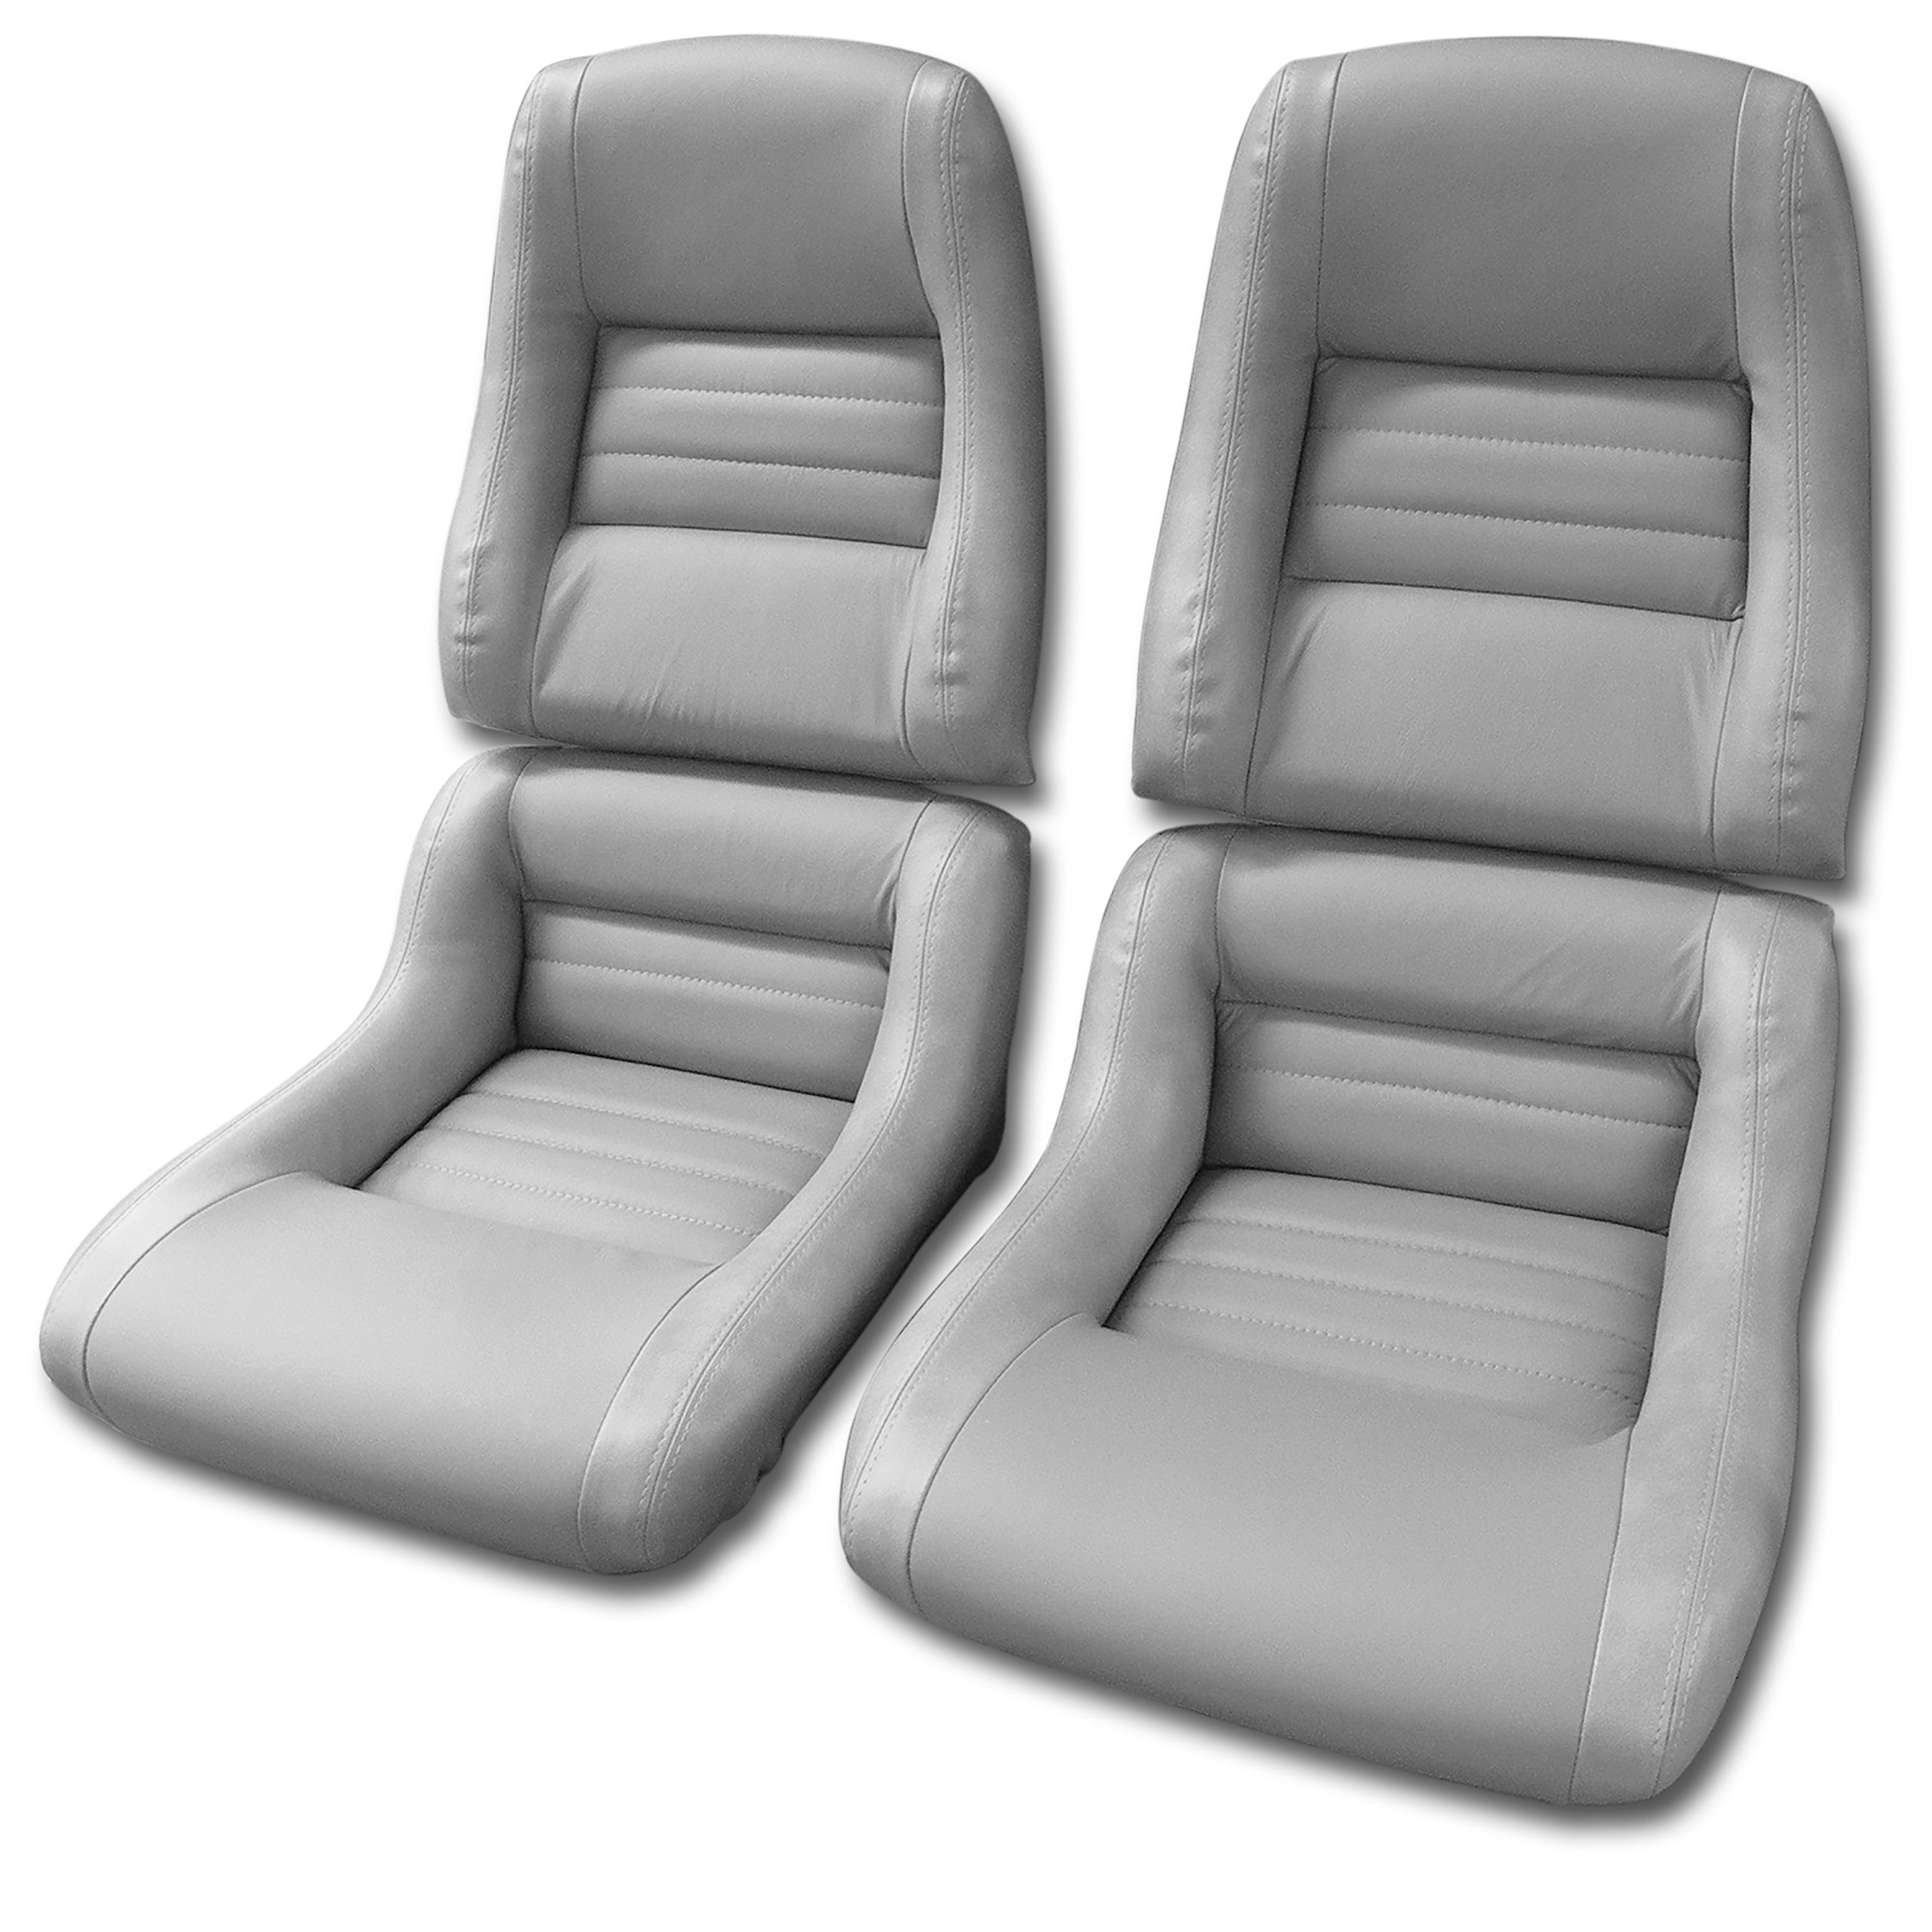 1982 Corvette C3 Mounted Leather Seat Covers Gray 2" Bolster CA-423268 